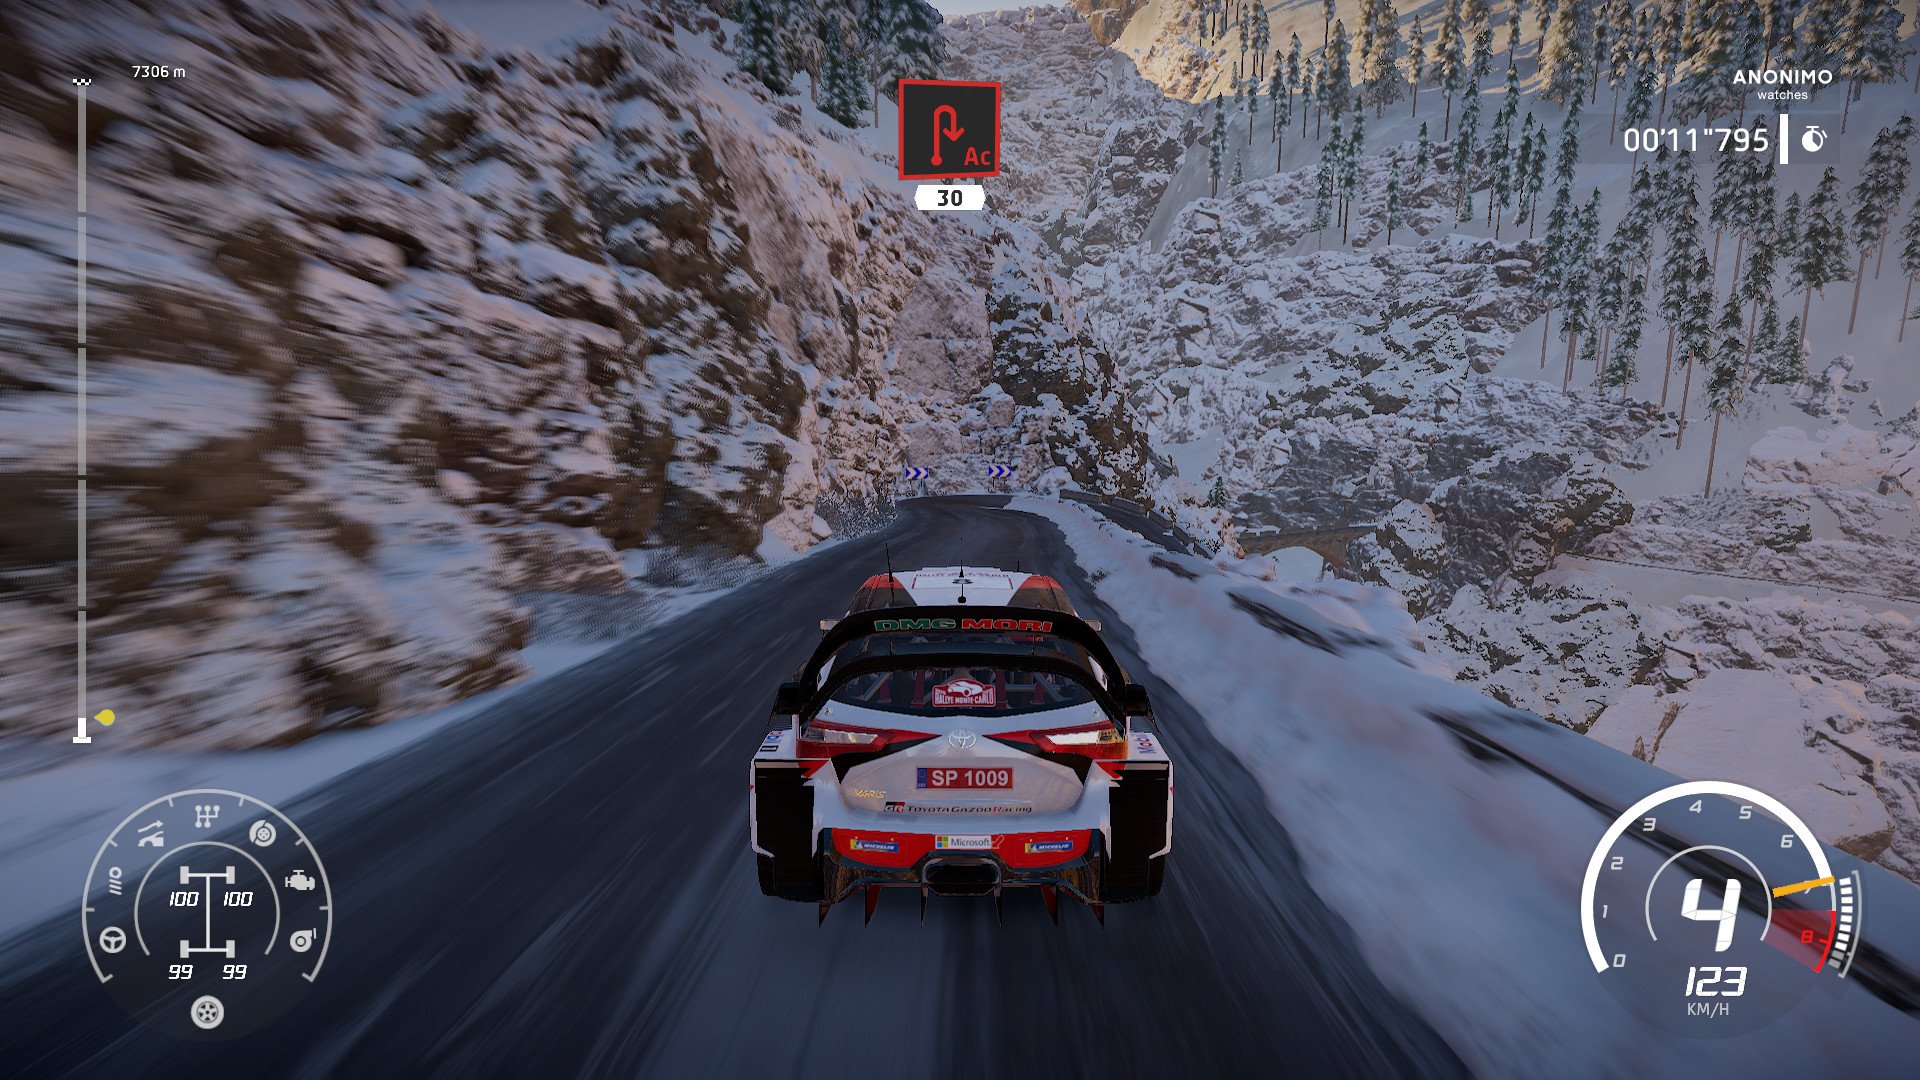 WRC 8 Deluxe Edition 11